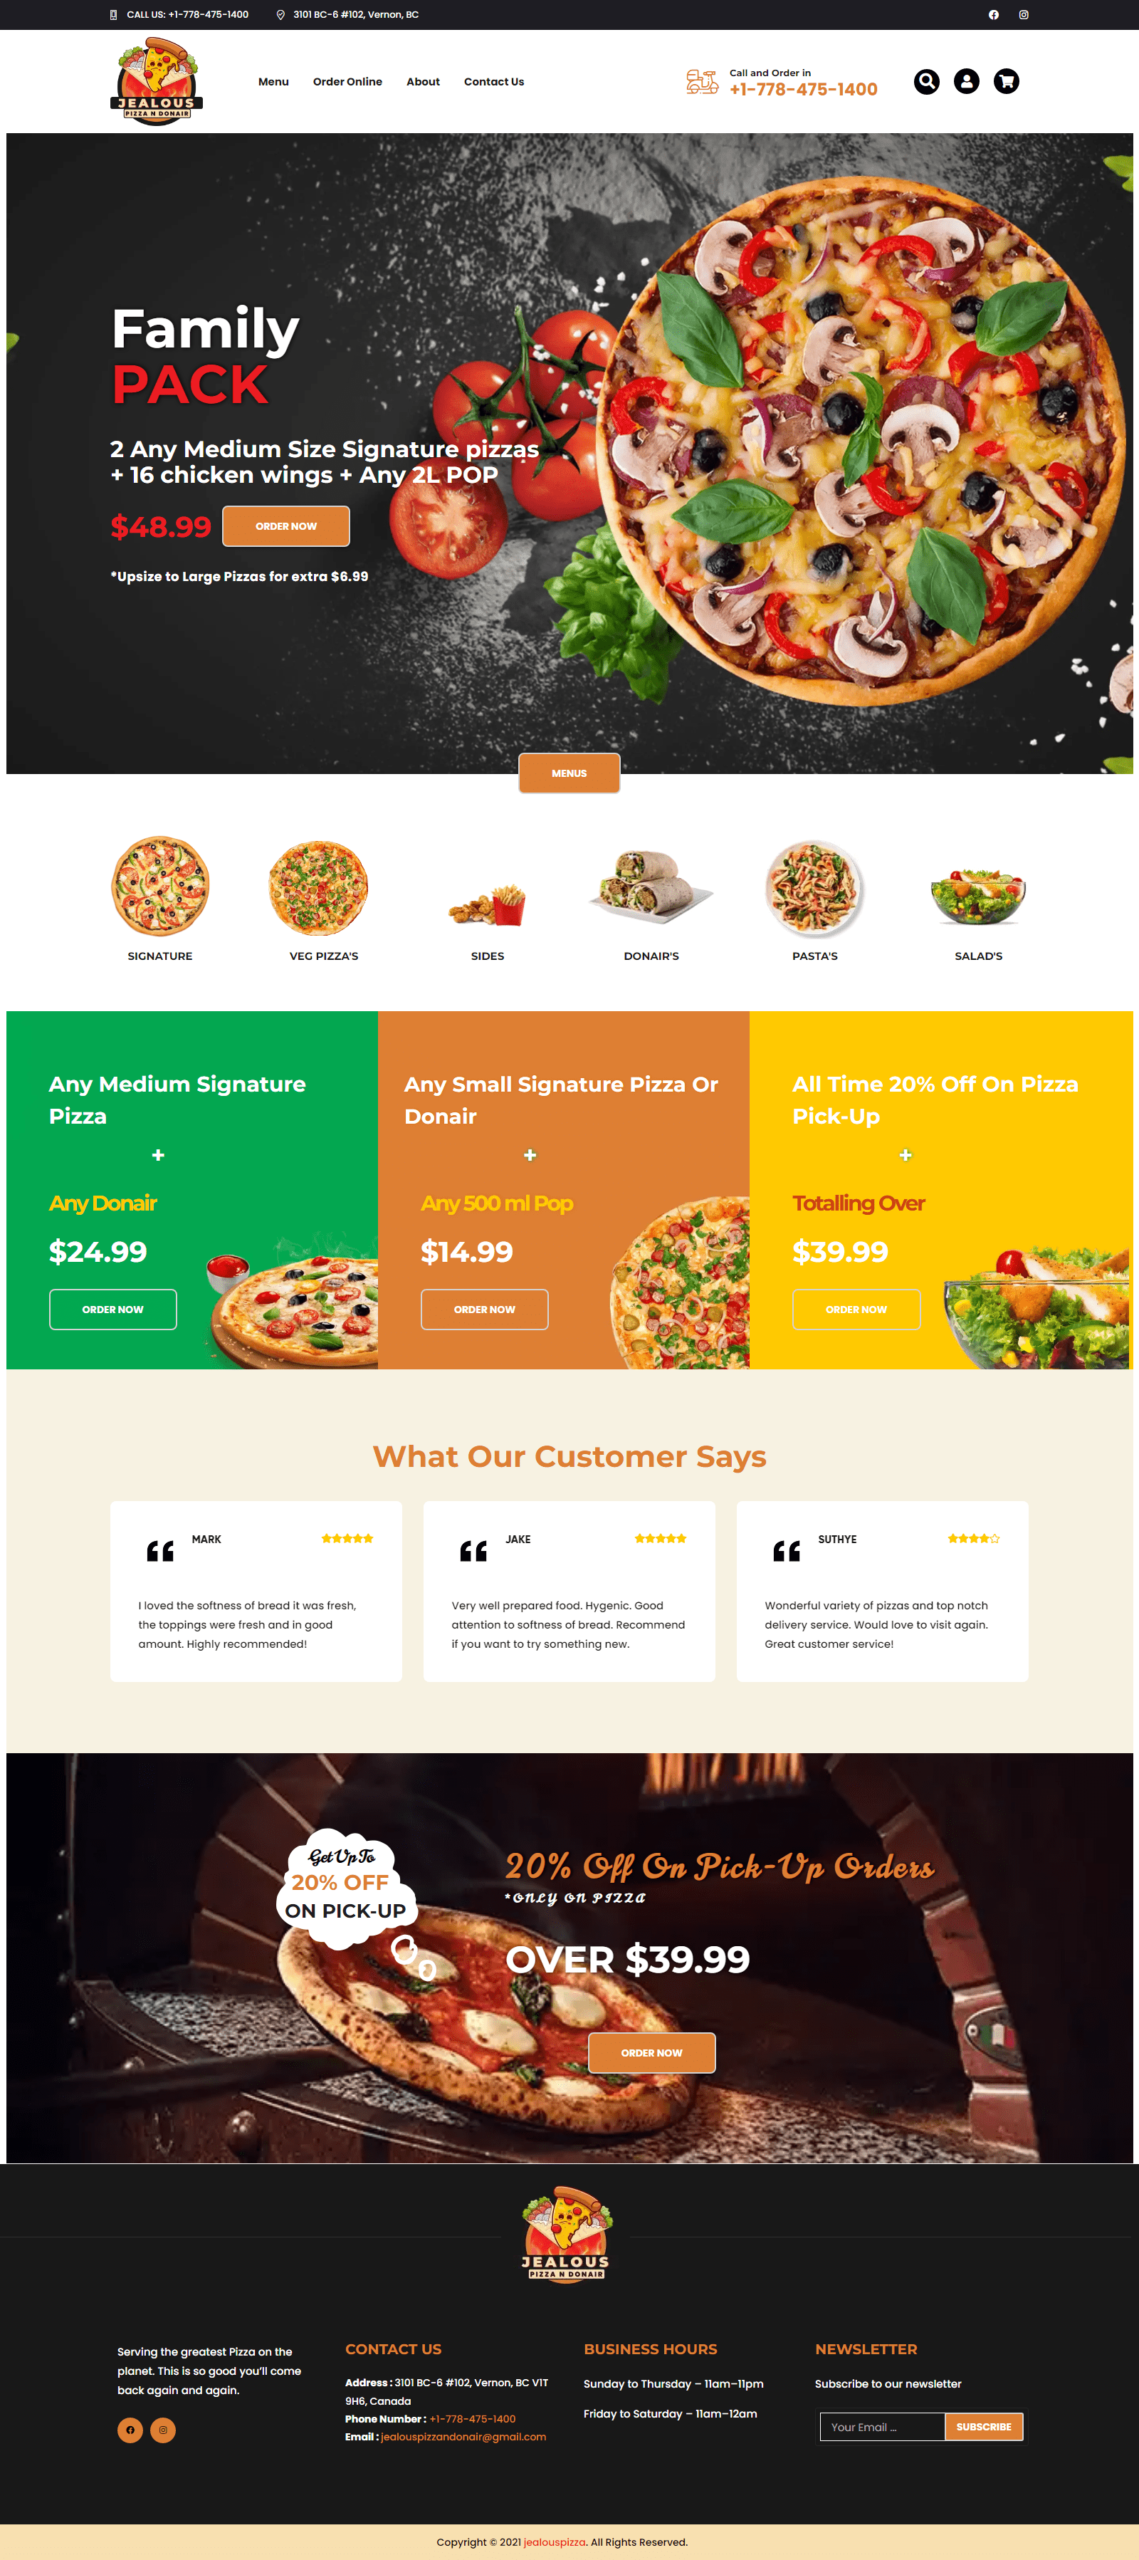 Jealous Pizza and Donair website was designed and maintained by Dhillon Marketing Agency based in Kelowna